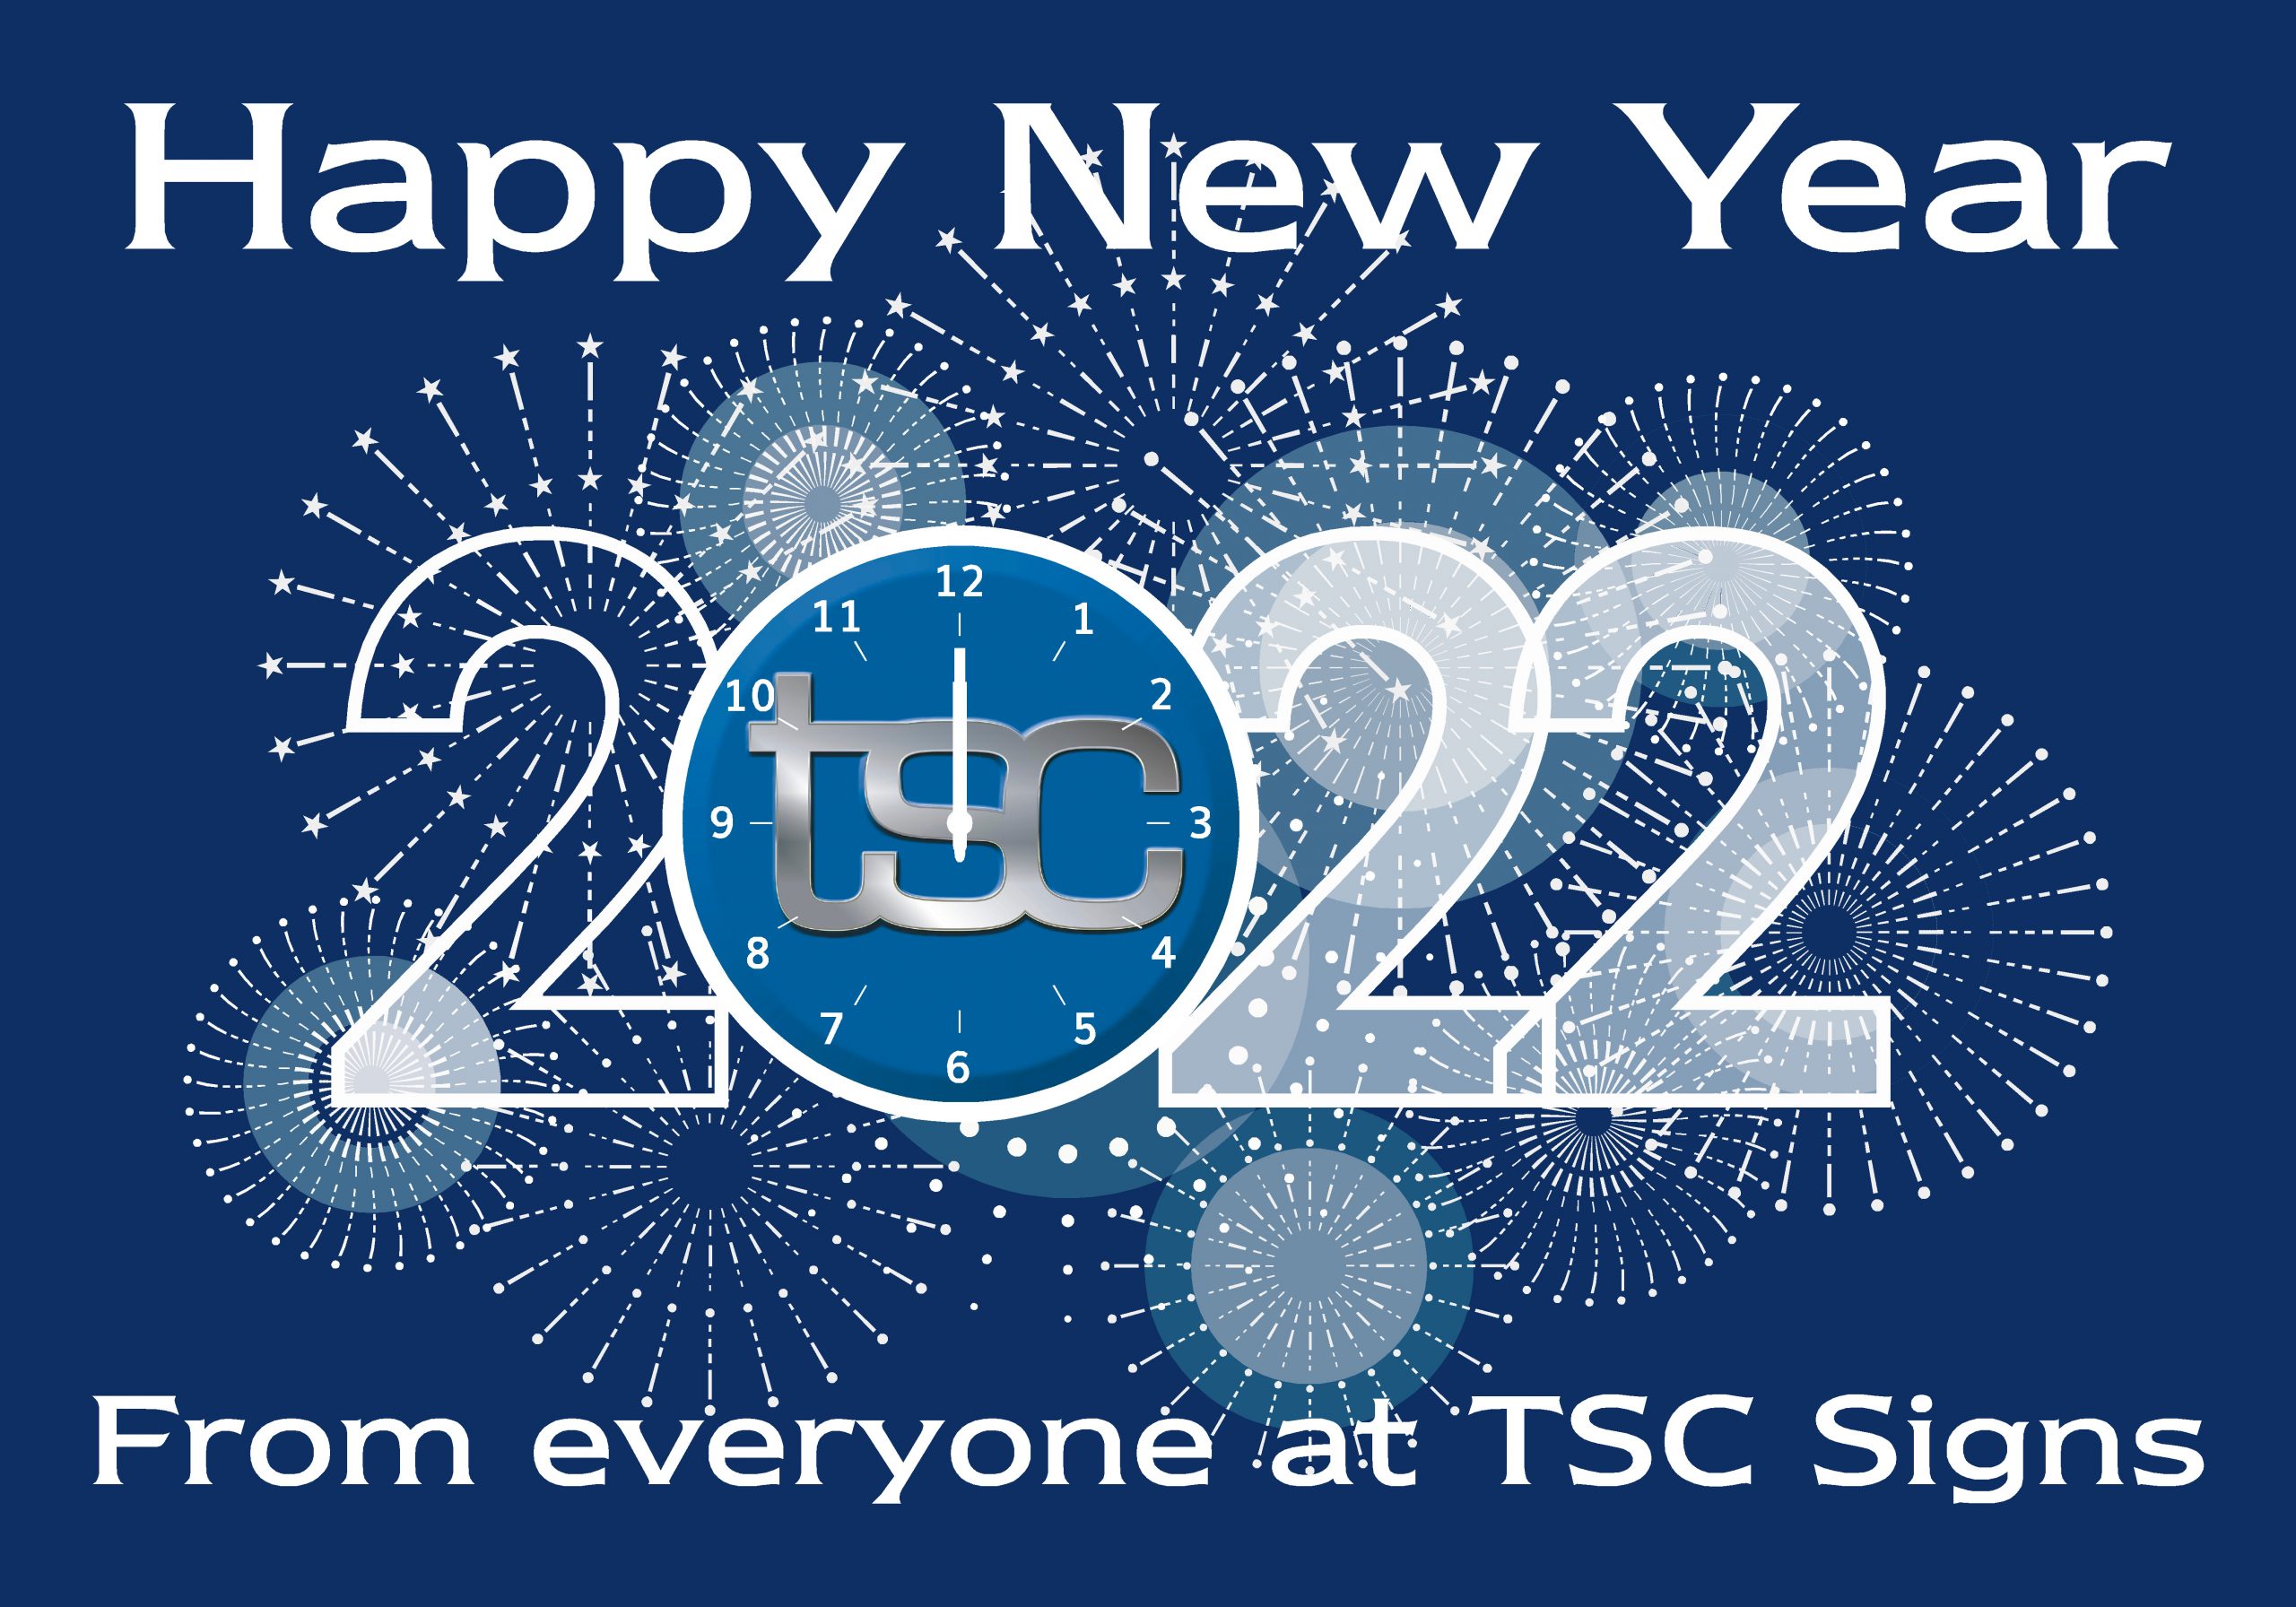 2022 picture with TSC logo